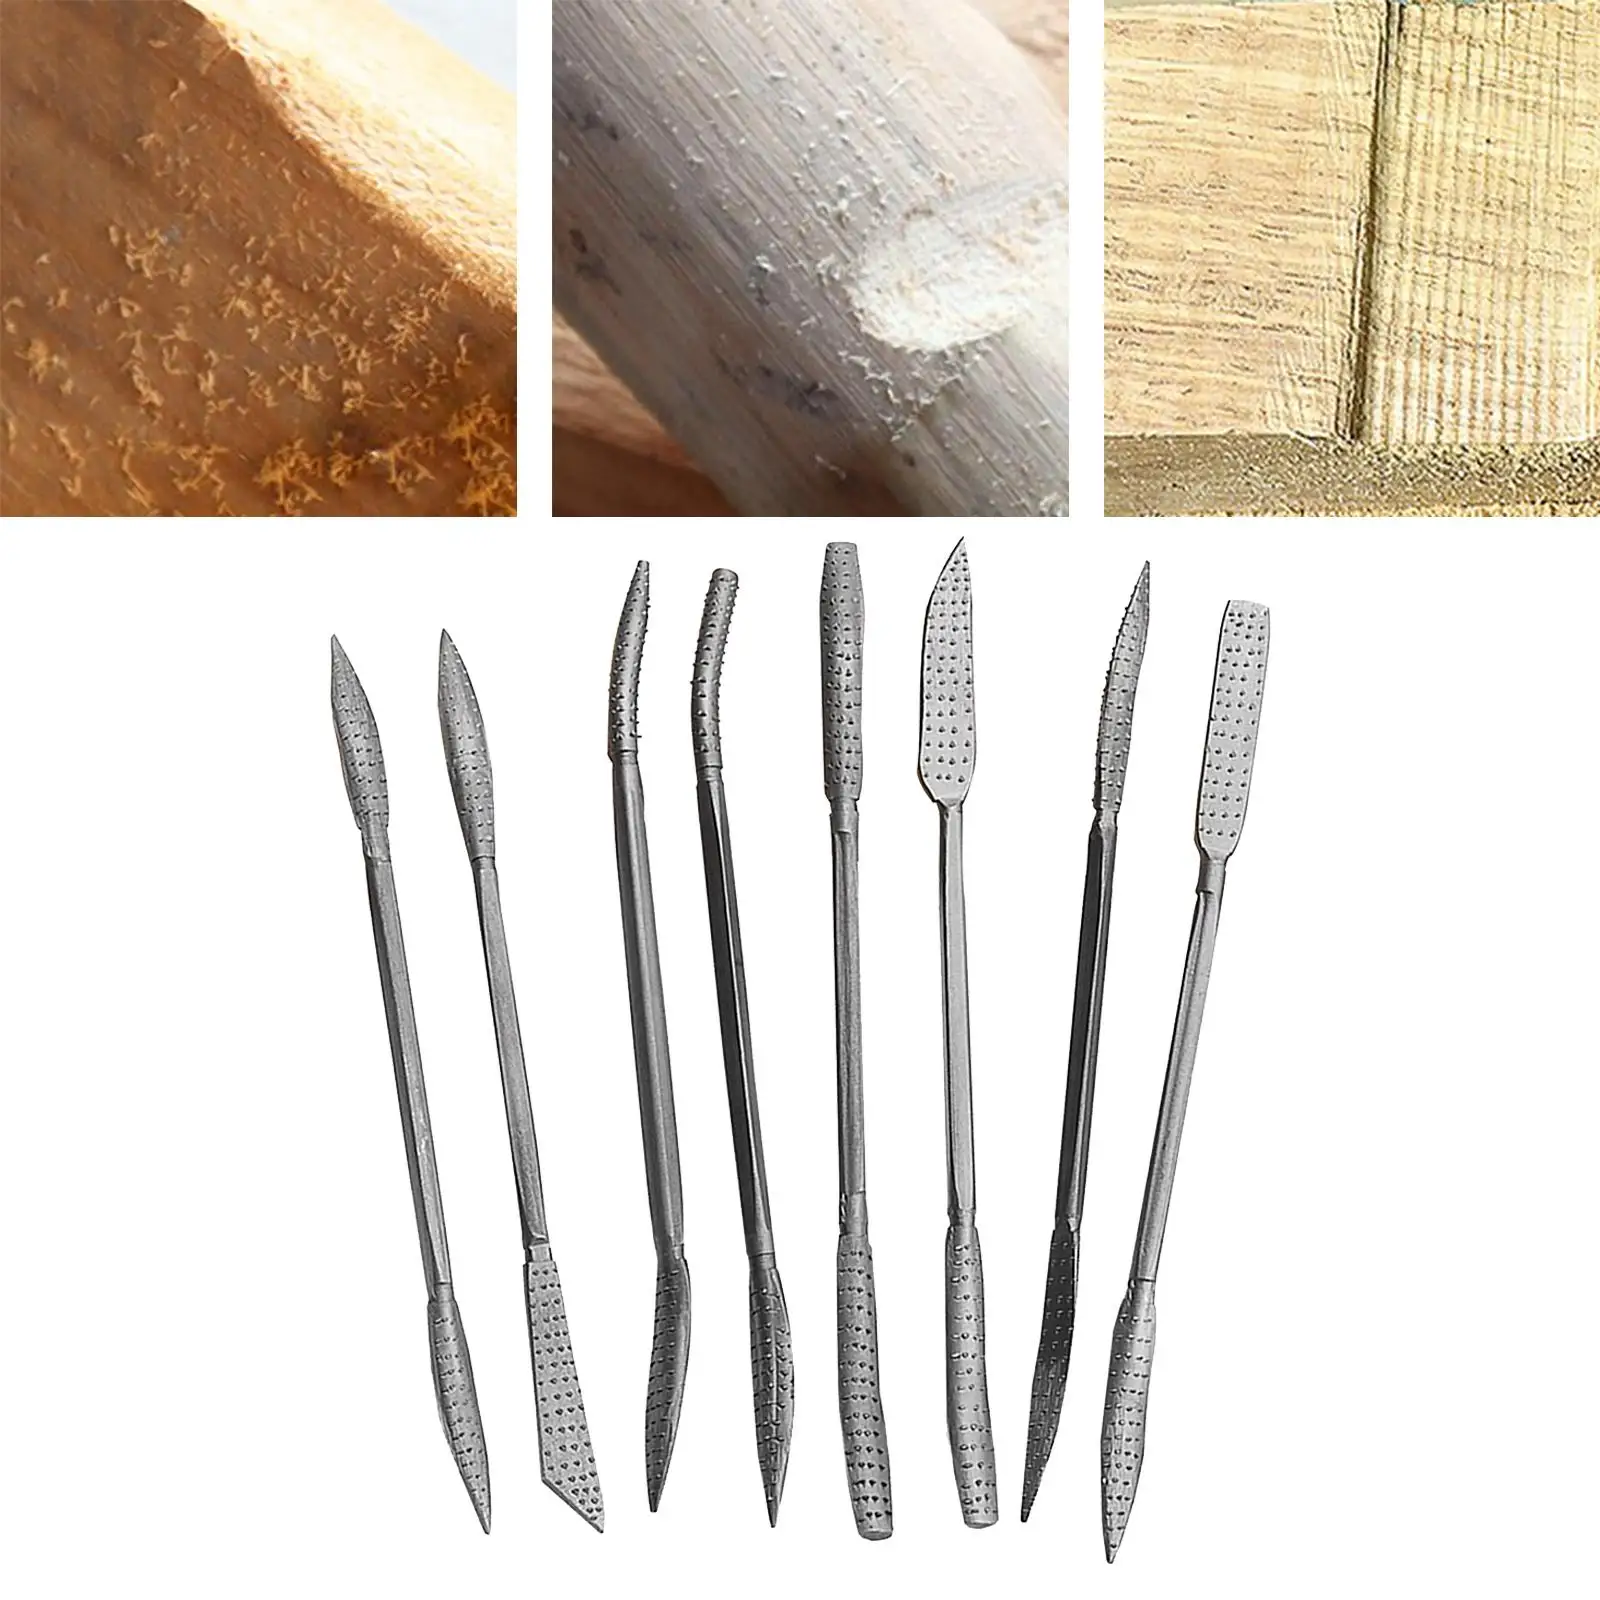 Double Ended Wood Rasp File Set, Riffler Burrs Durable Portable Steel for Rasping Coarse Carving Craft Grinding Woodworking